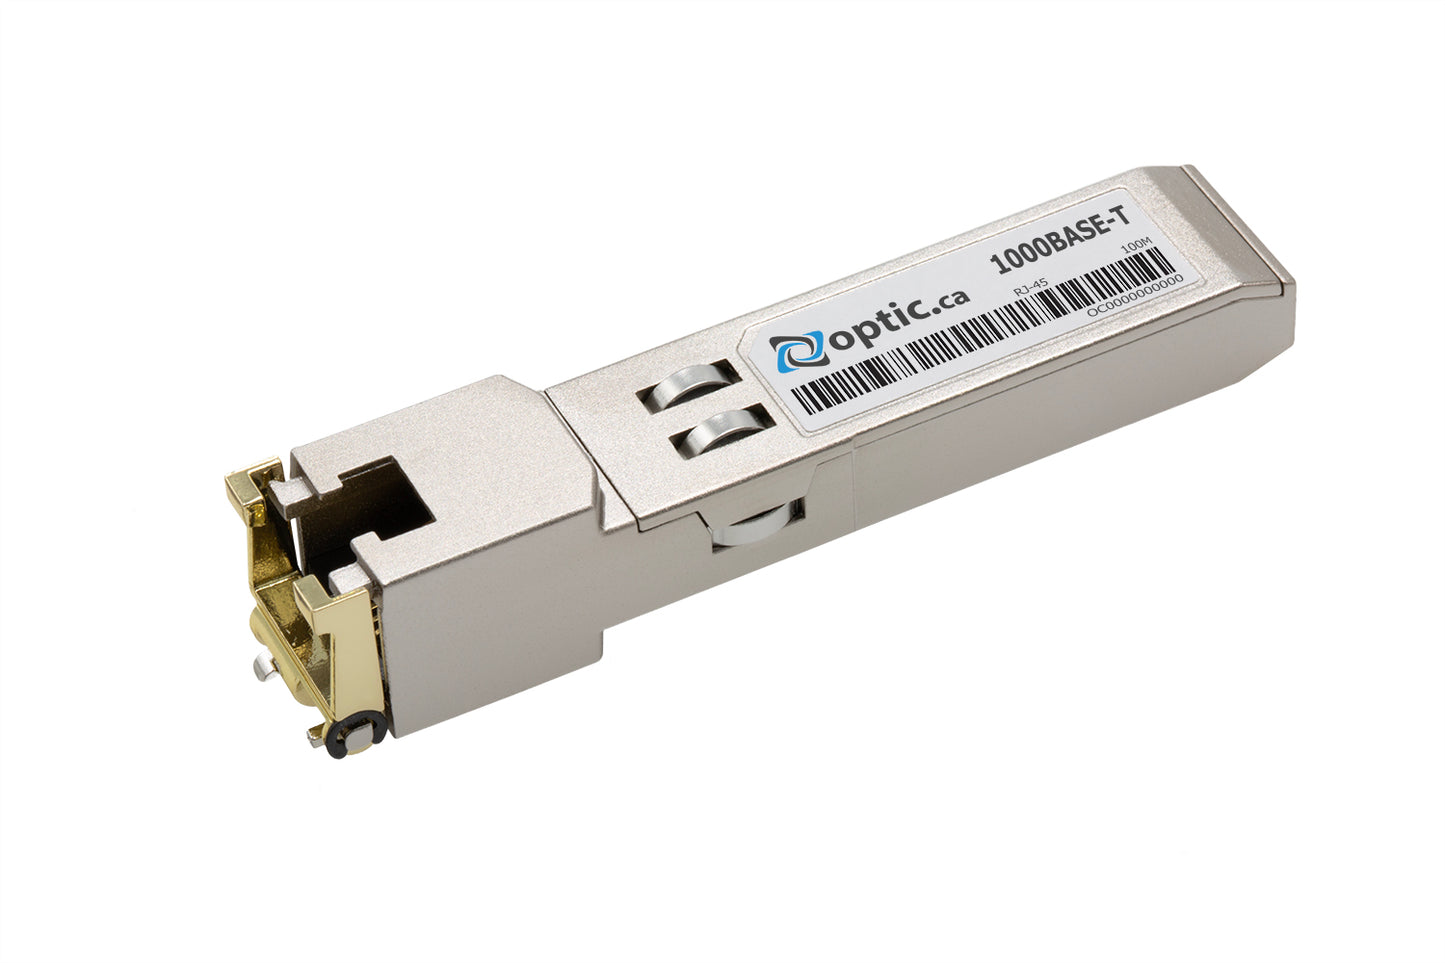 OPTIC.CA - 1000BASE-T SFP - 10050-OC - EXTREME NETWORKS COMPATIBLE